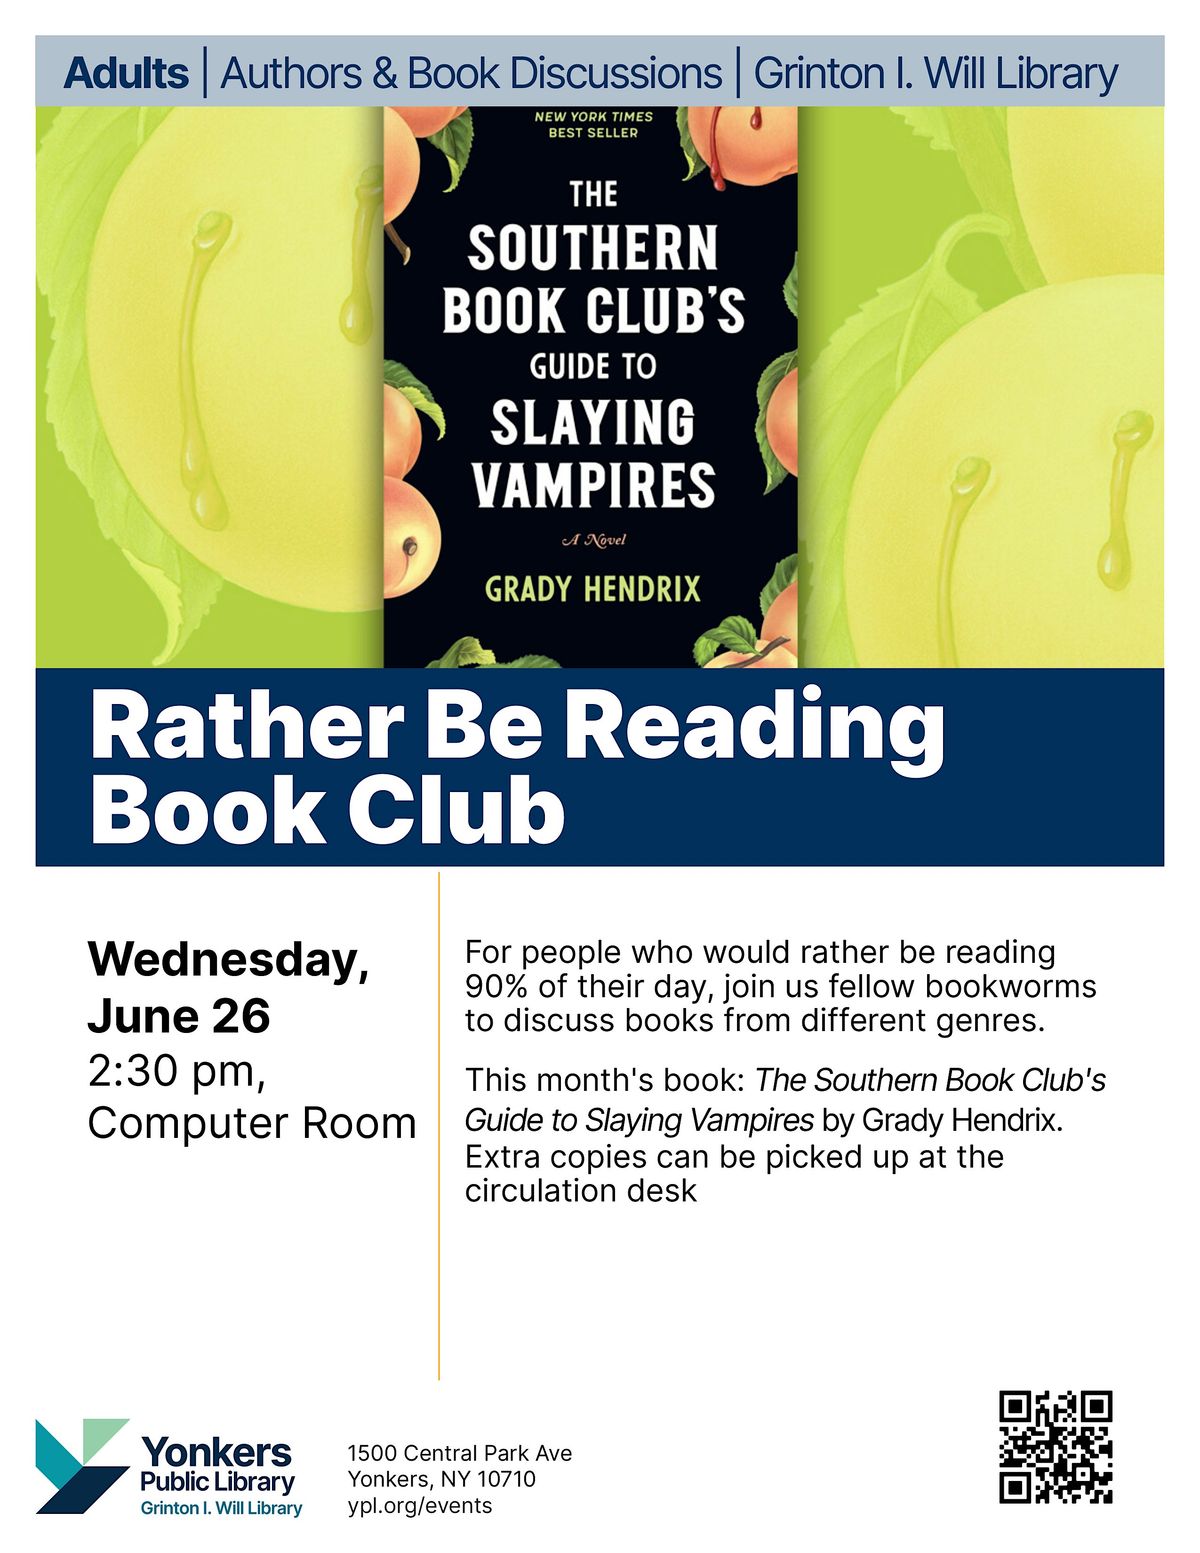 Rather Be Reading Book Club